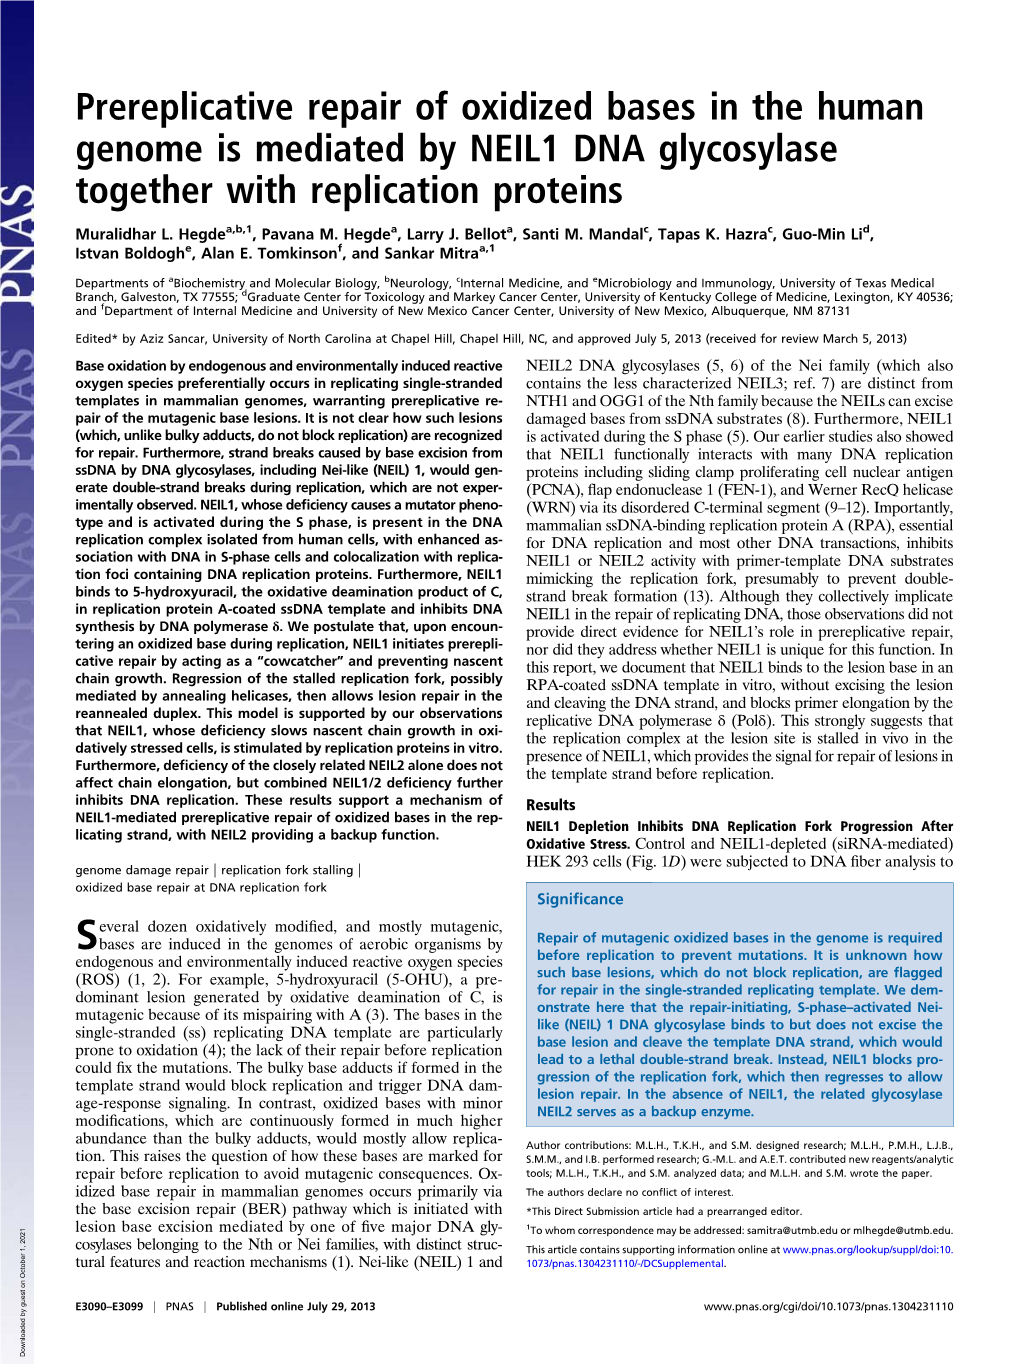 Prereplicative Repair of Oxidized Bases in the Human Genome Is Mediated by NEIL1 DNA Glycosylase Together with Replication Proteins